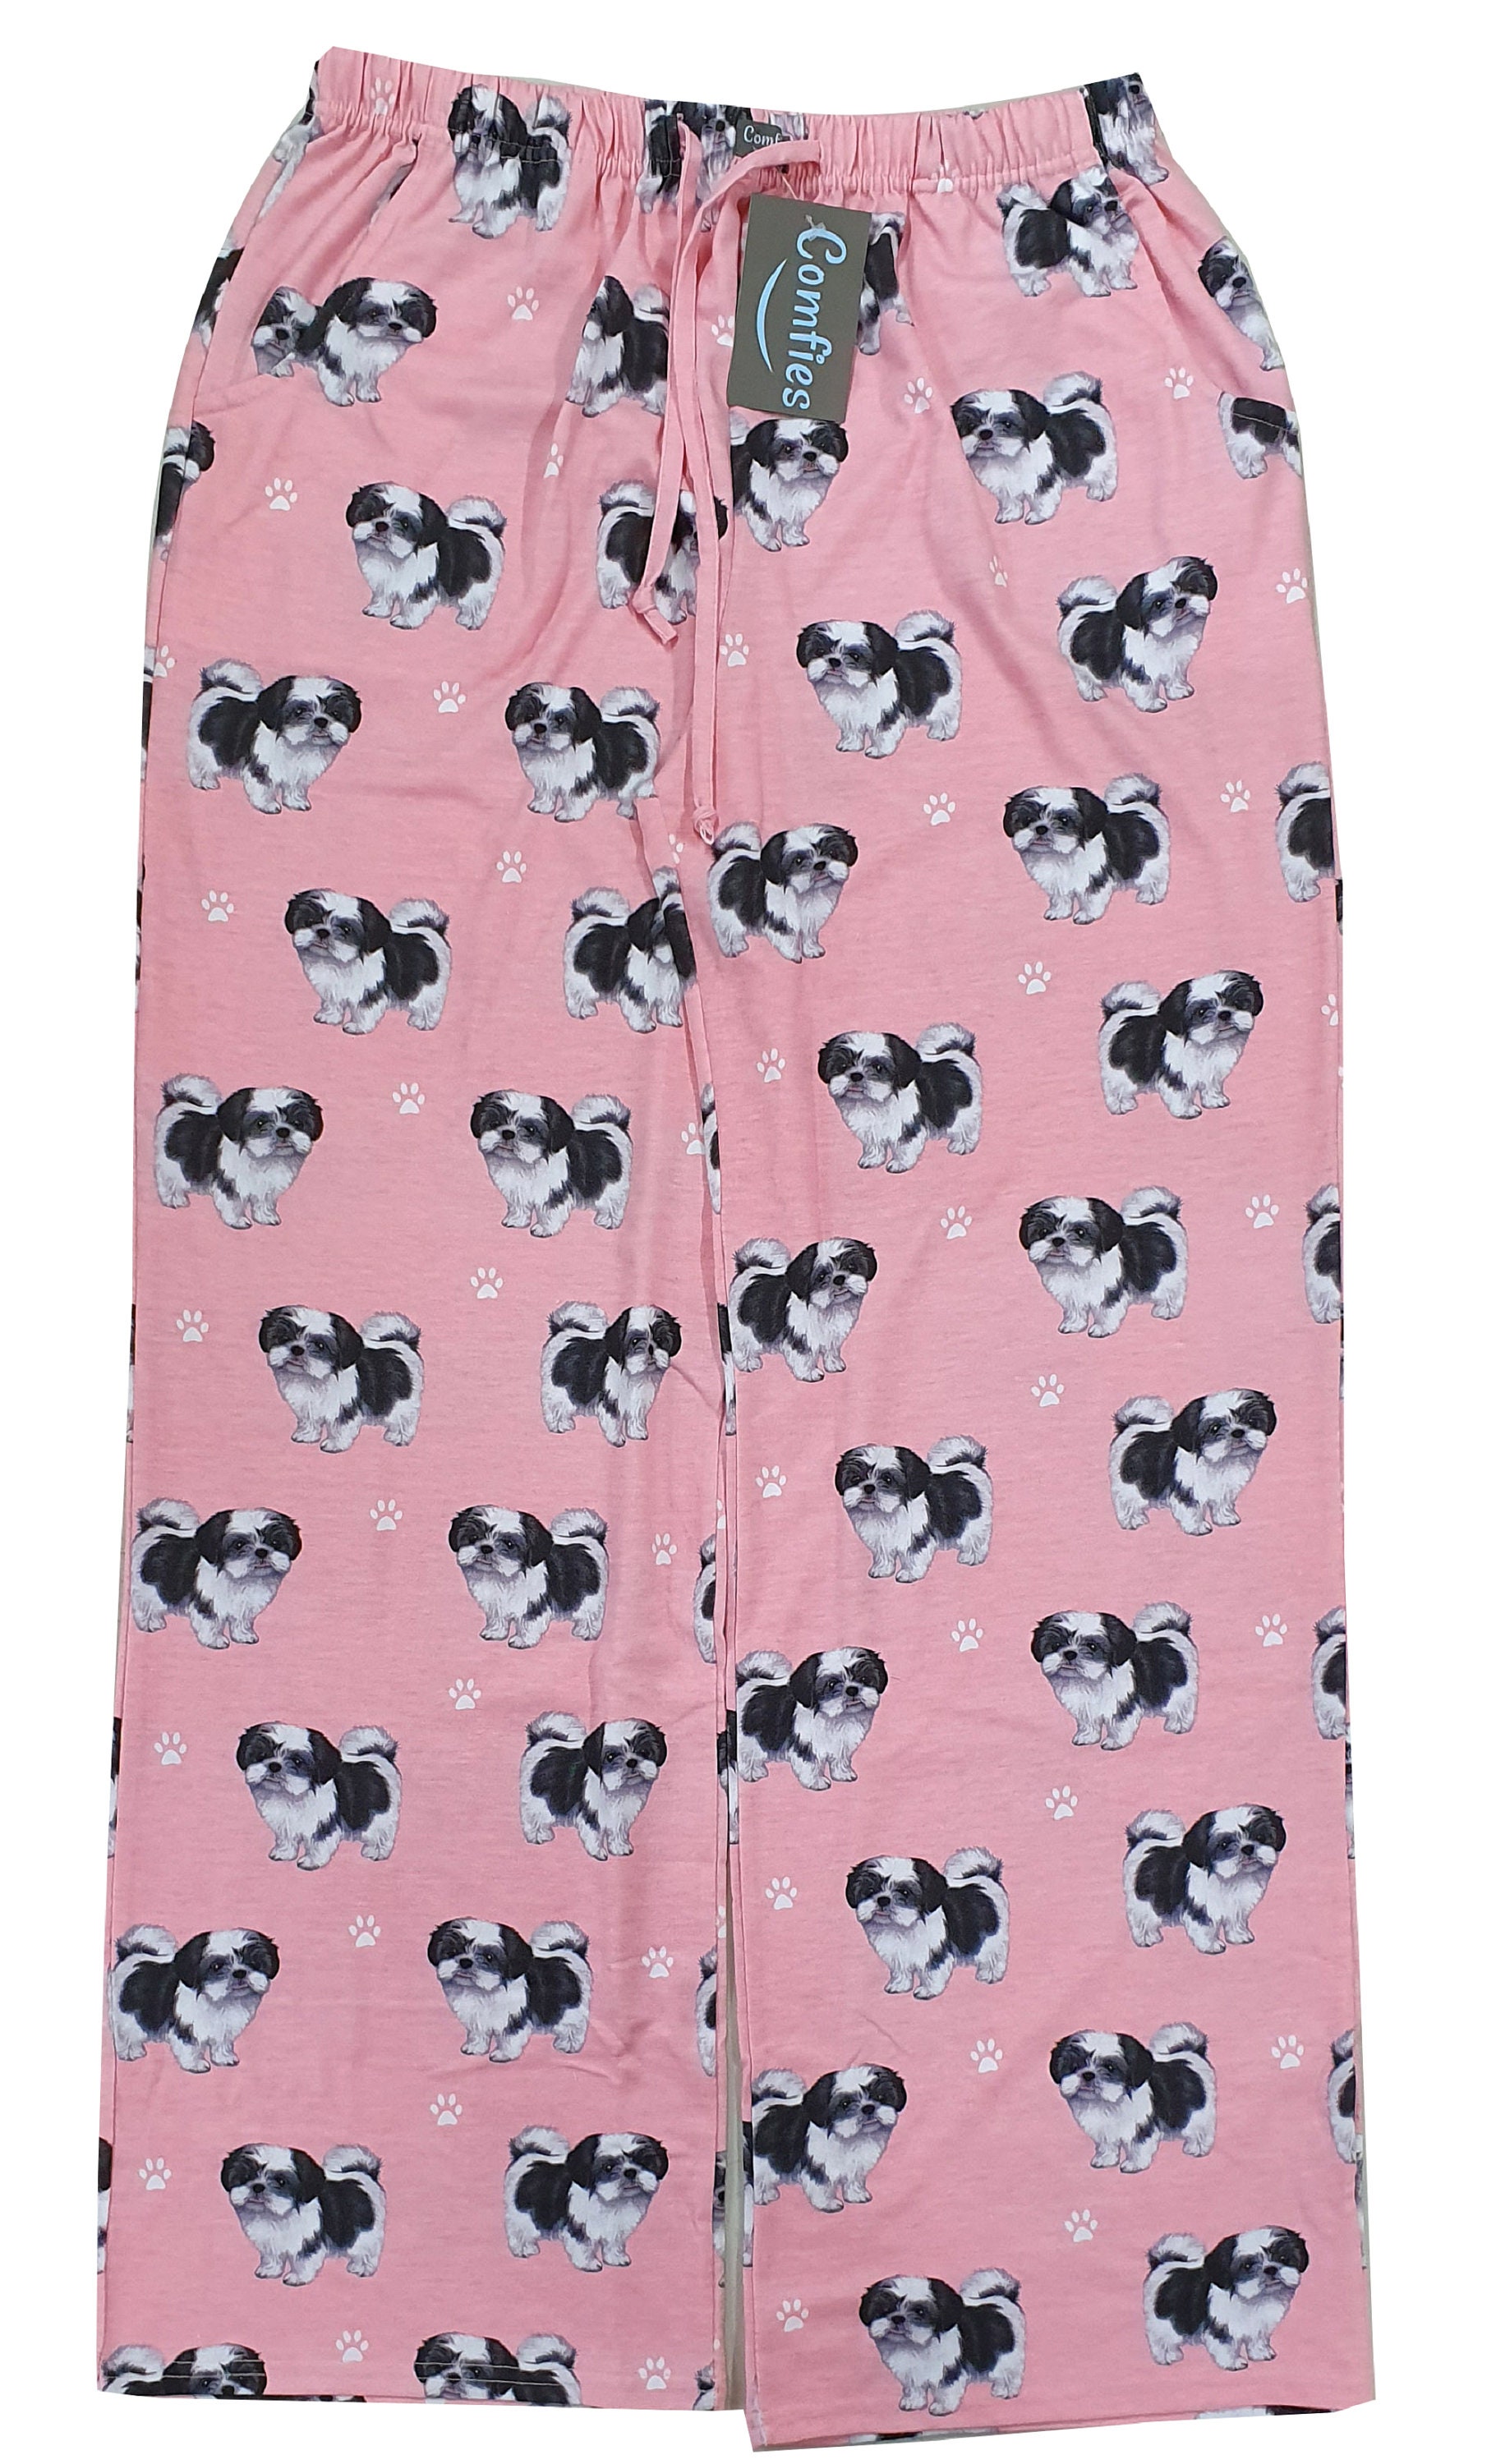 Shih Tzu Unisex Cotton Blend Pajama Bottoms - Super Soft & Comfortable Perfect For Gifts